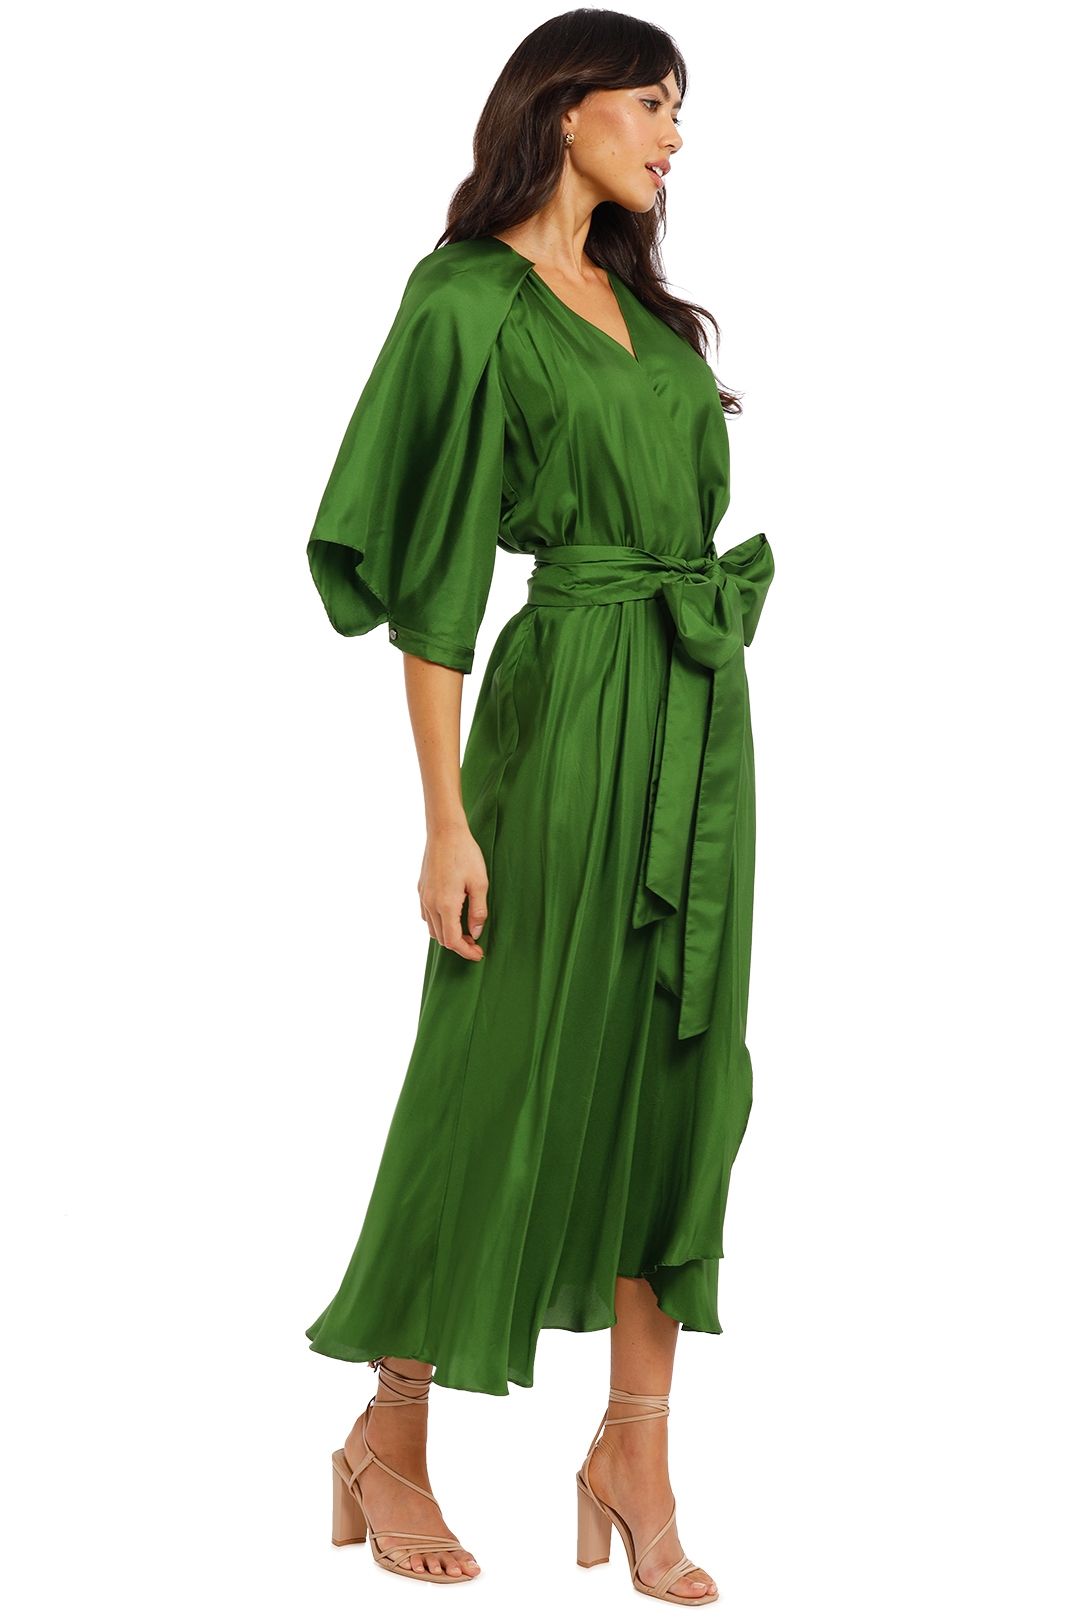 Ginger and Smart Easel Wrap Dress in Fern GREEN